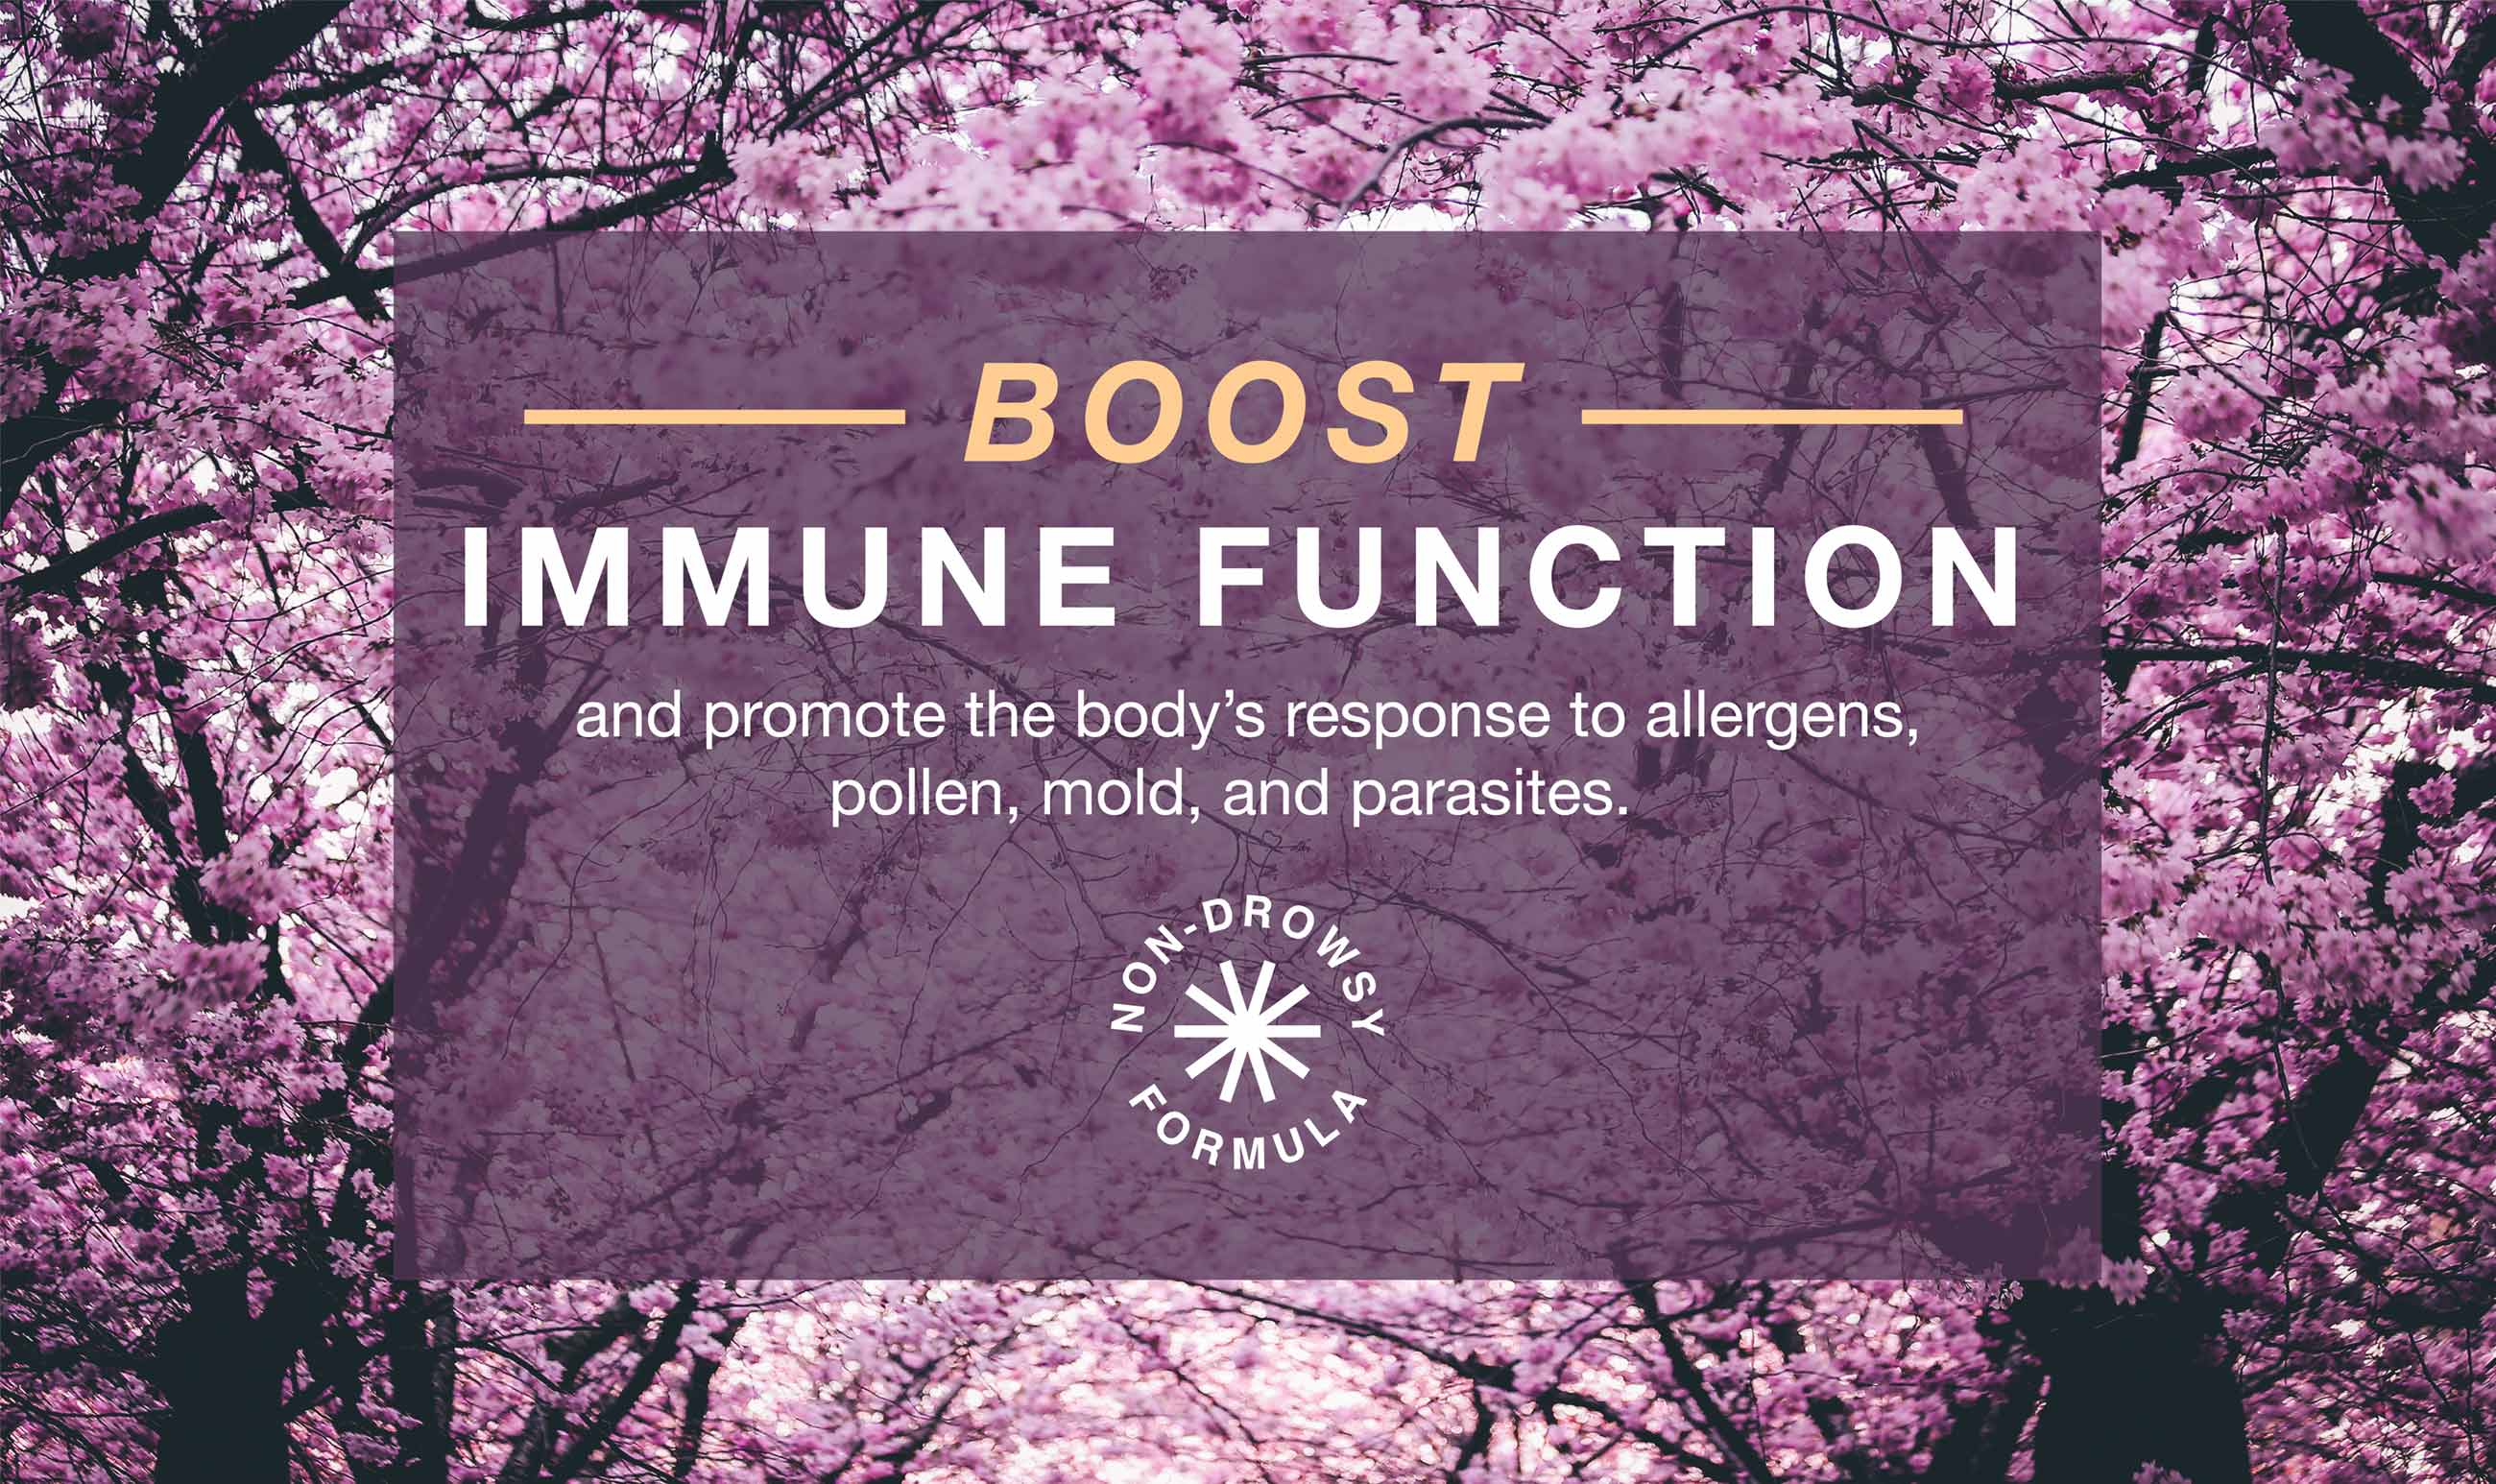 Non-drowsy formula to boost immune function and promote the body's response to allergens, pollen, mold, and parasites.